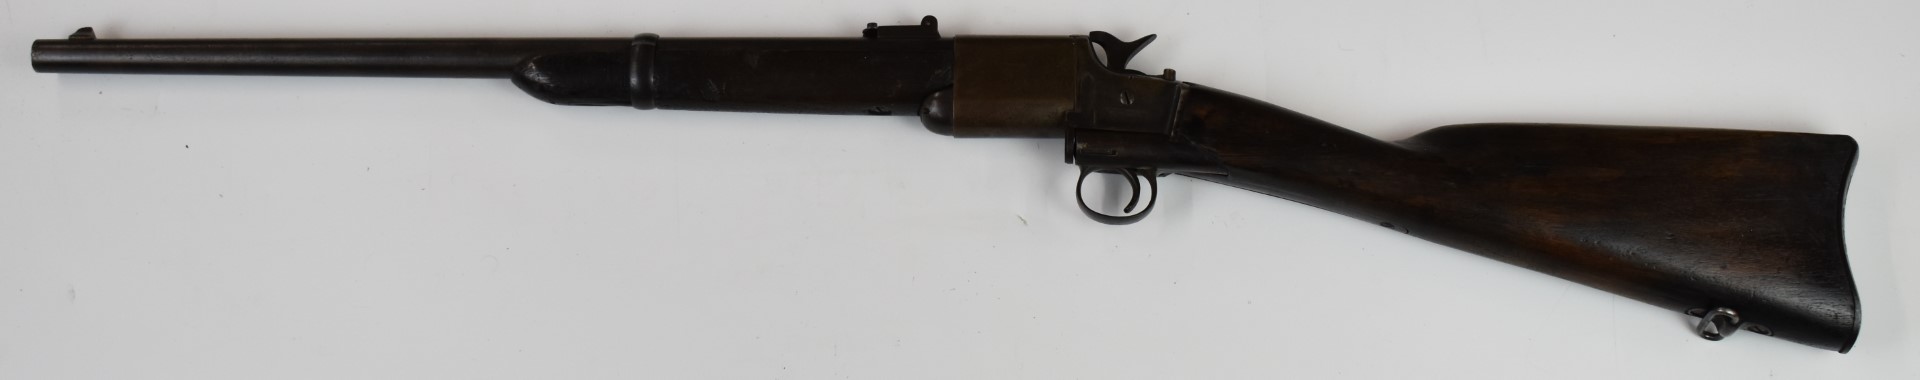 Meriden Manufacturing Co for Charles Parker of Triplett & Scott .50 twist-action repeating carbine - Image 6 of 7